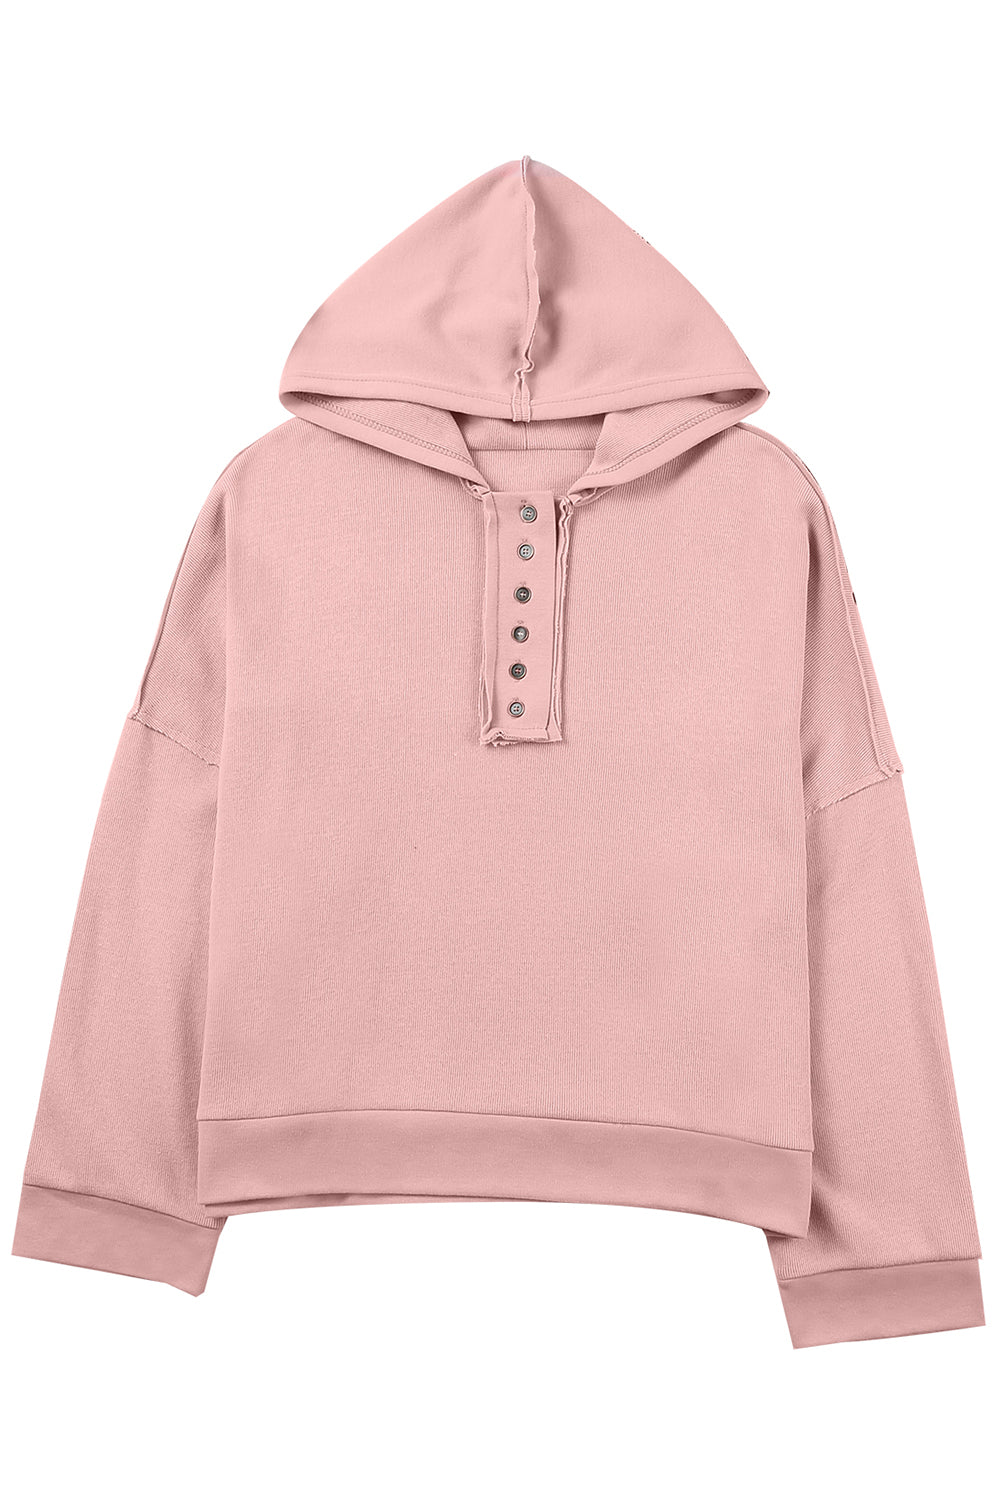 Pink Casual Button Patchwork Trim Hoodie